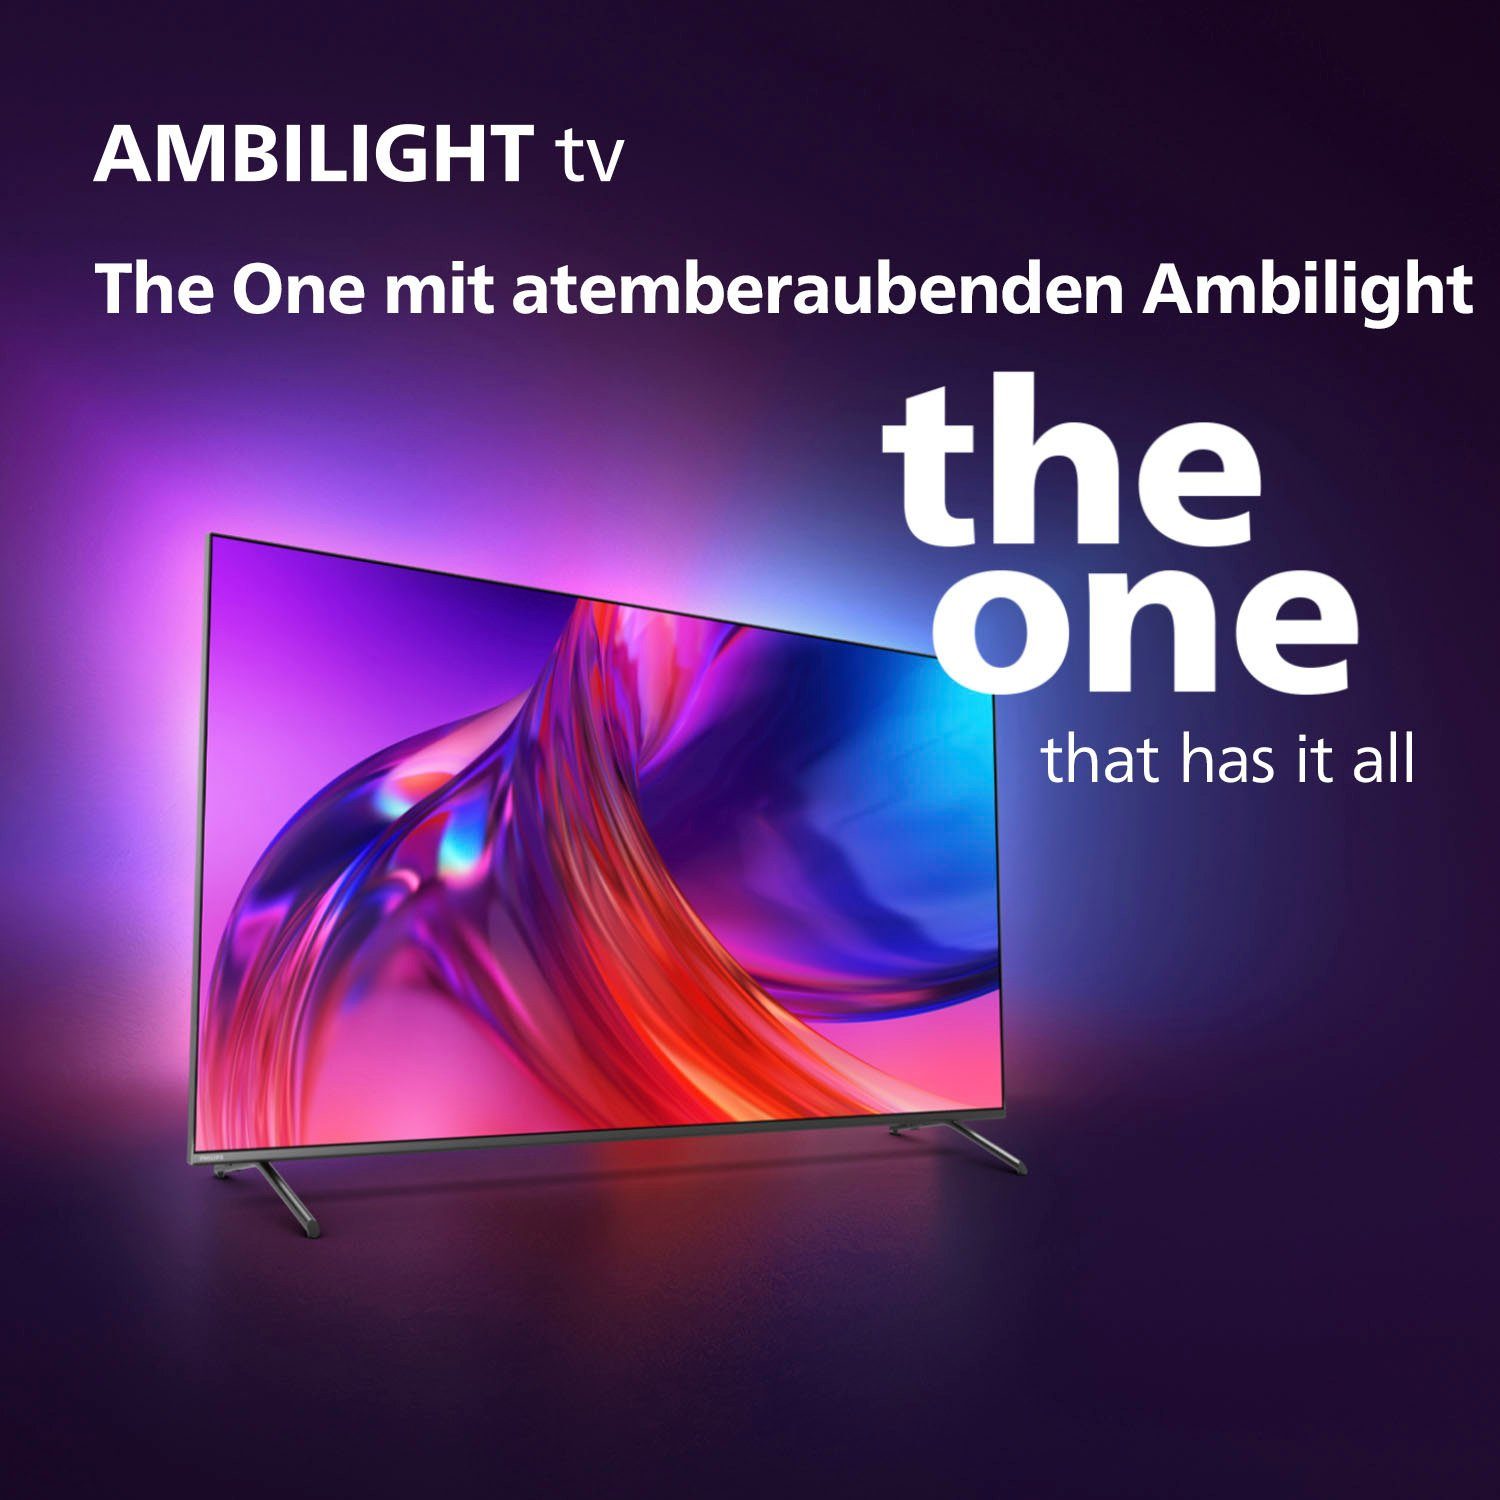 Ultra (189 TV, Google cm/75 HD, Zoll, LED-Fernseher 4K 75PUS8808/12 Philips TV, Android Smart-TV)